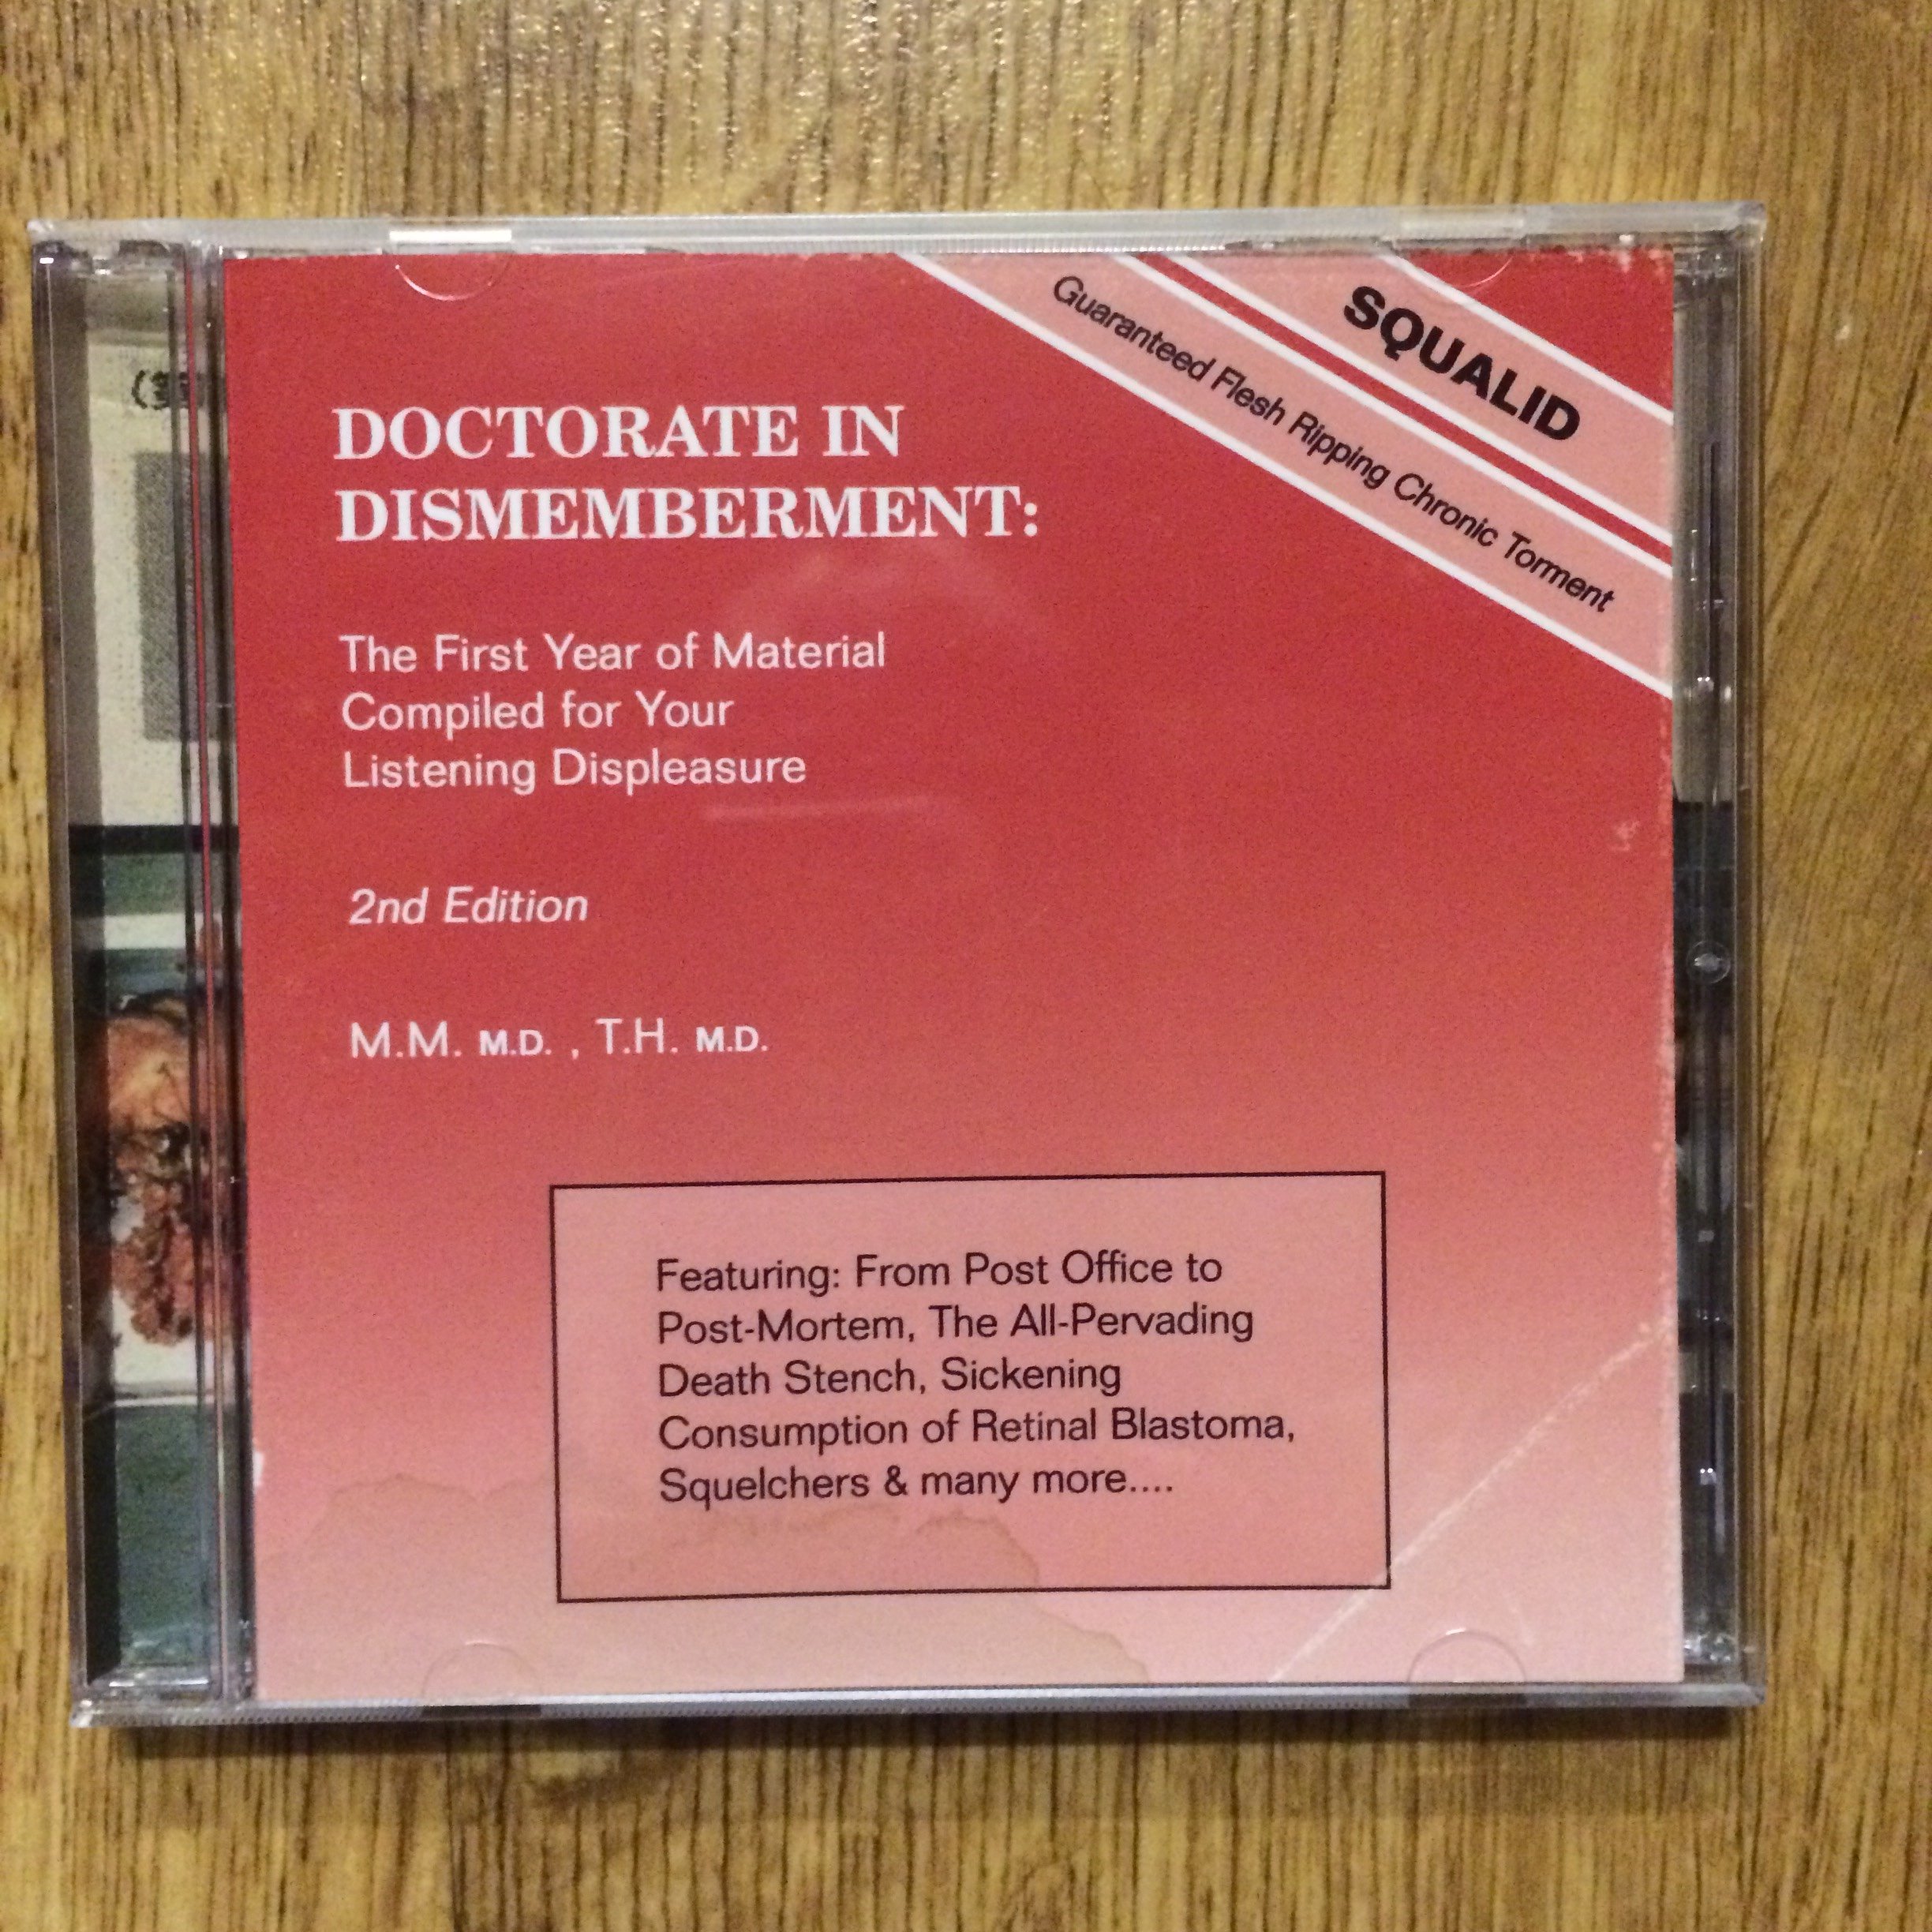 Photo of the Squalid - "Doctorate in Dismemberment" CD